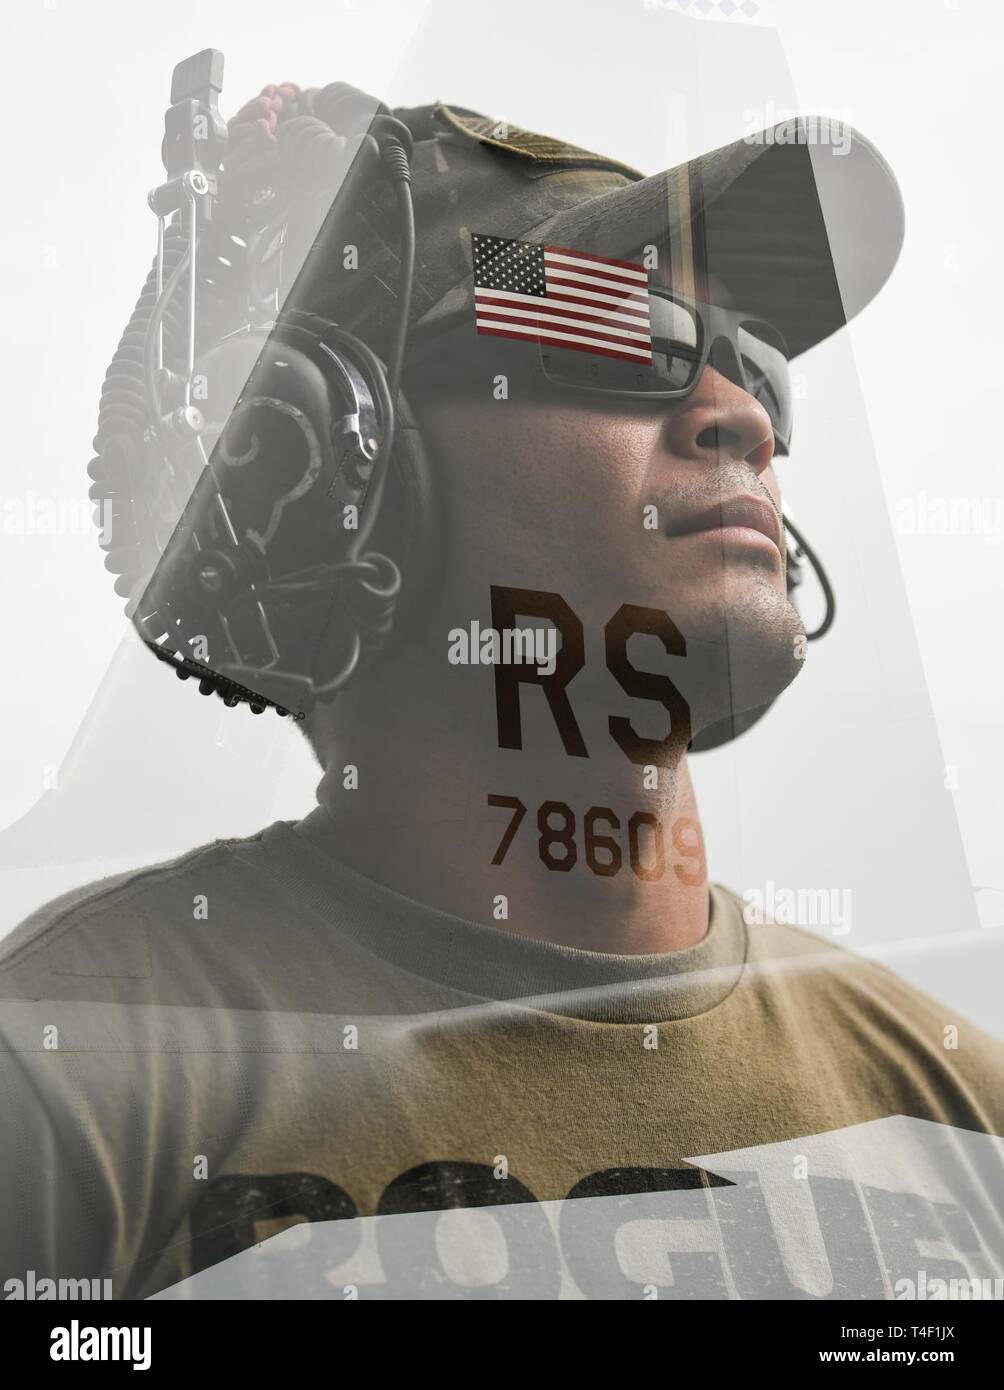 U.S. Air Force Staff Sgt. Joshua Obena, an aircraft maintainer assigned to the 75th Expeditionary Airlift Squadron, Combined Joint Task Force-Horn of Africa (CJTF-HOA), stands for an in-camera double exposure portrait at Maputo International Airport, Mozambique, March 27, 2019, for the U.S. Department of Defense’s relief effort in the Republic of Mozambique and surrounding areas following Cyclone Idai. Teams from CJTF-HOA, which is leading DoD support to relief efforts in Mozambique, began immediate preparation to respond following a call for assistance from the U.S. Agency for International D Stock Photo